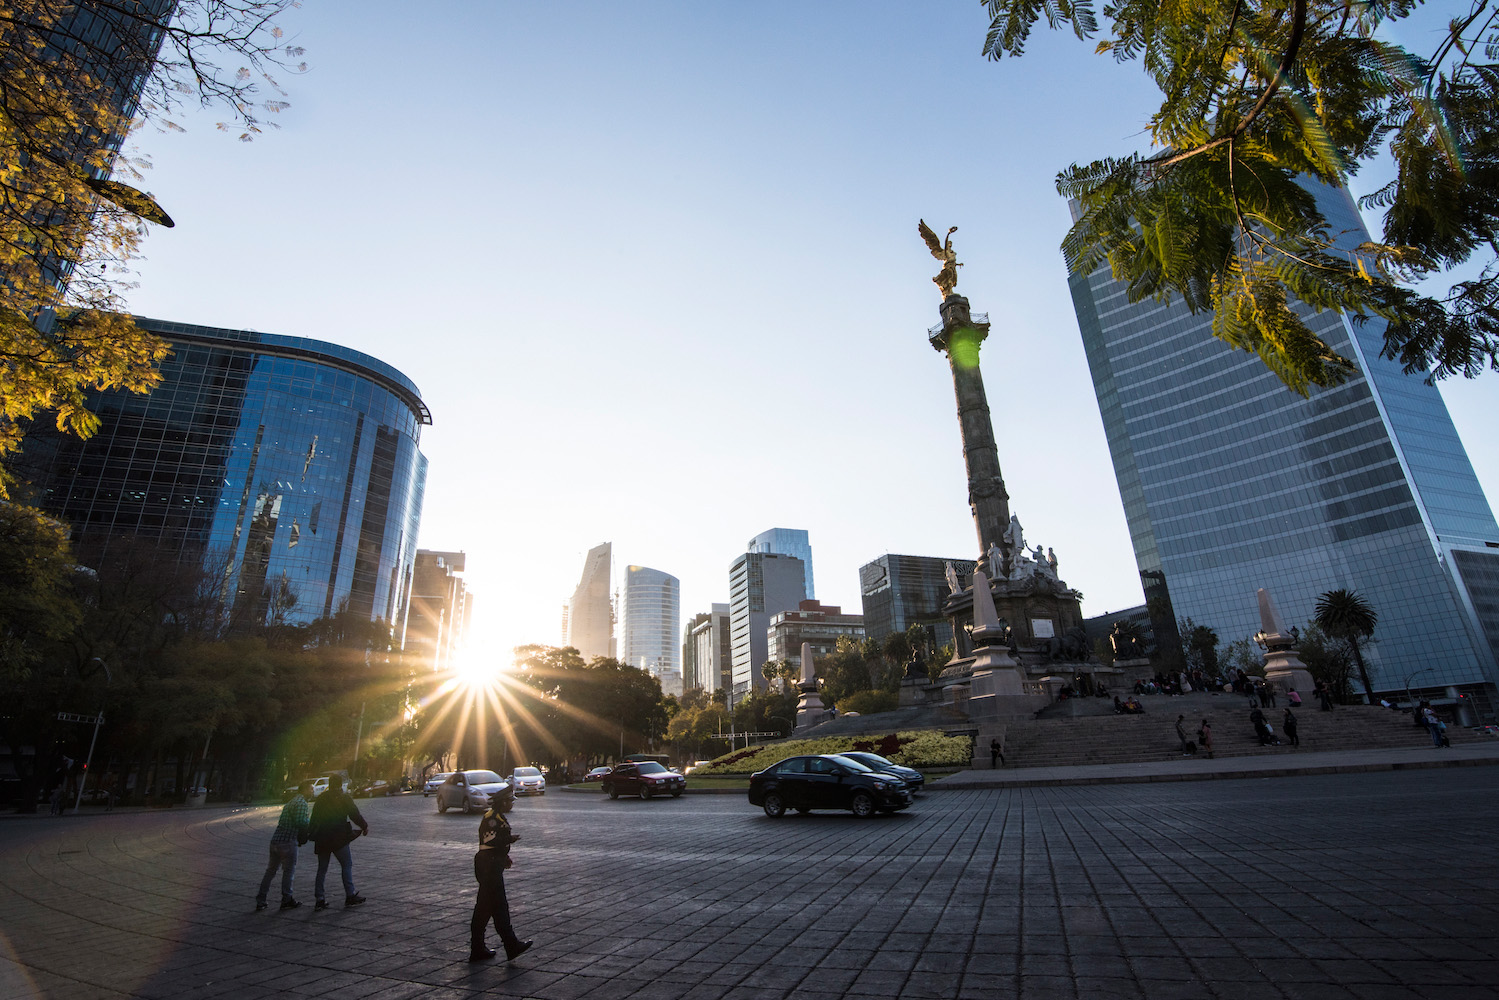 Mexico City's Angel of Independence